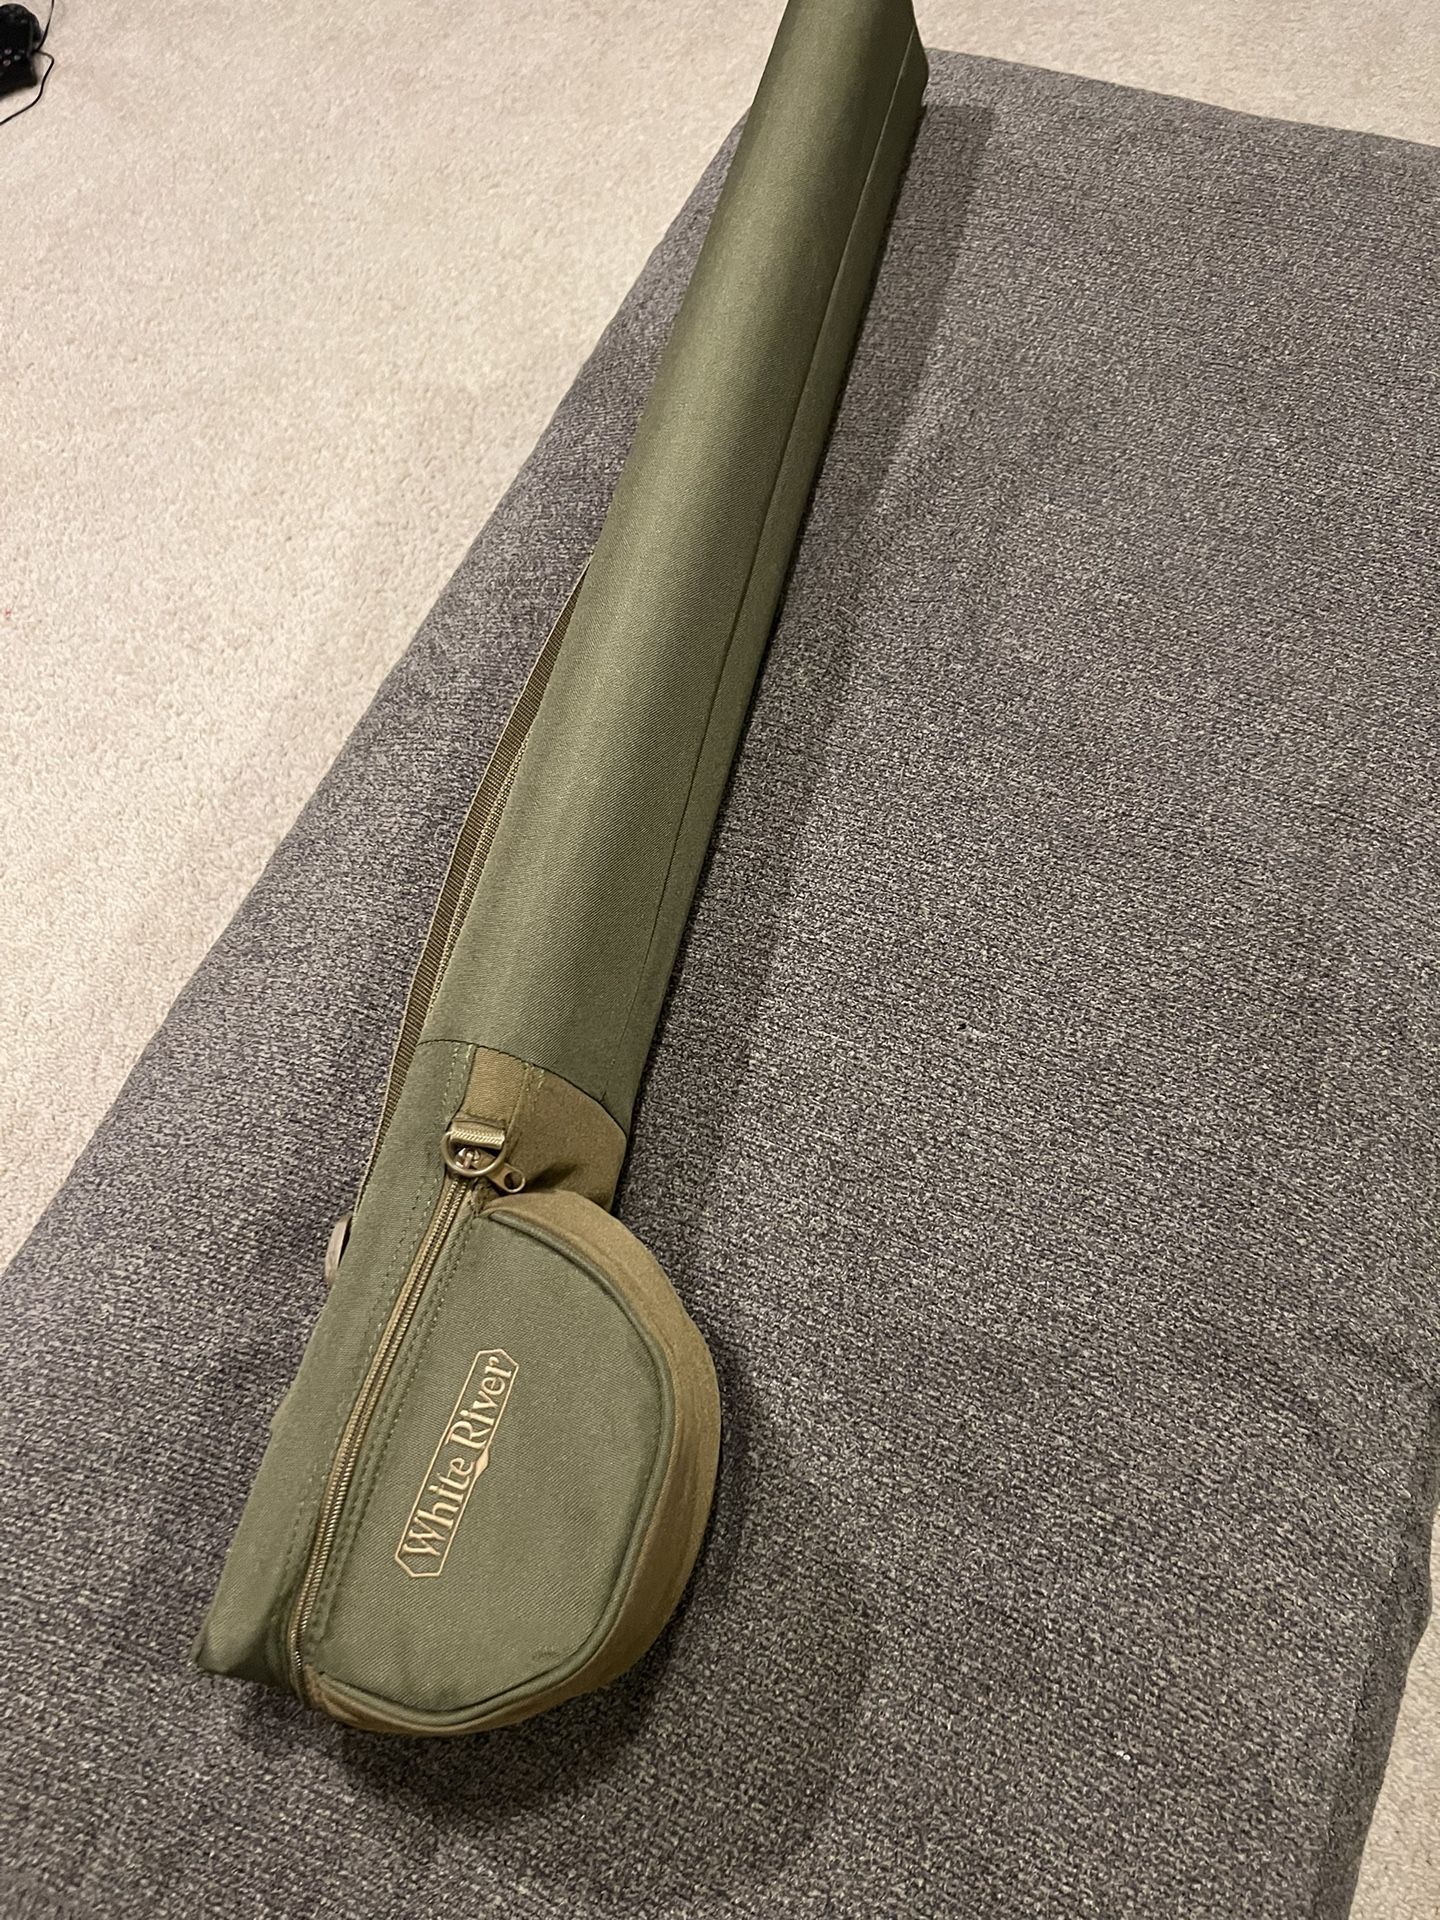 Dual Rod Carrying Case